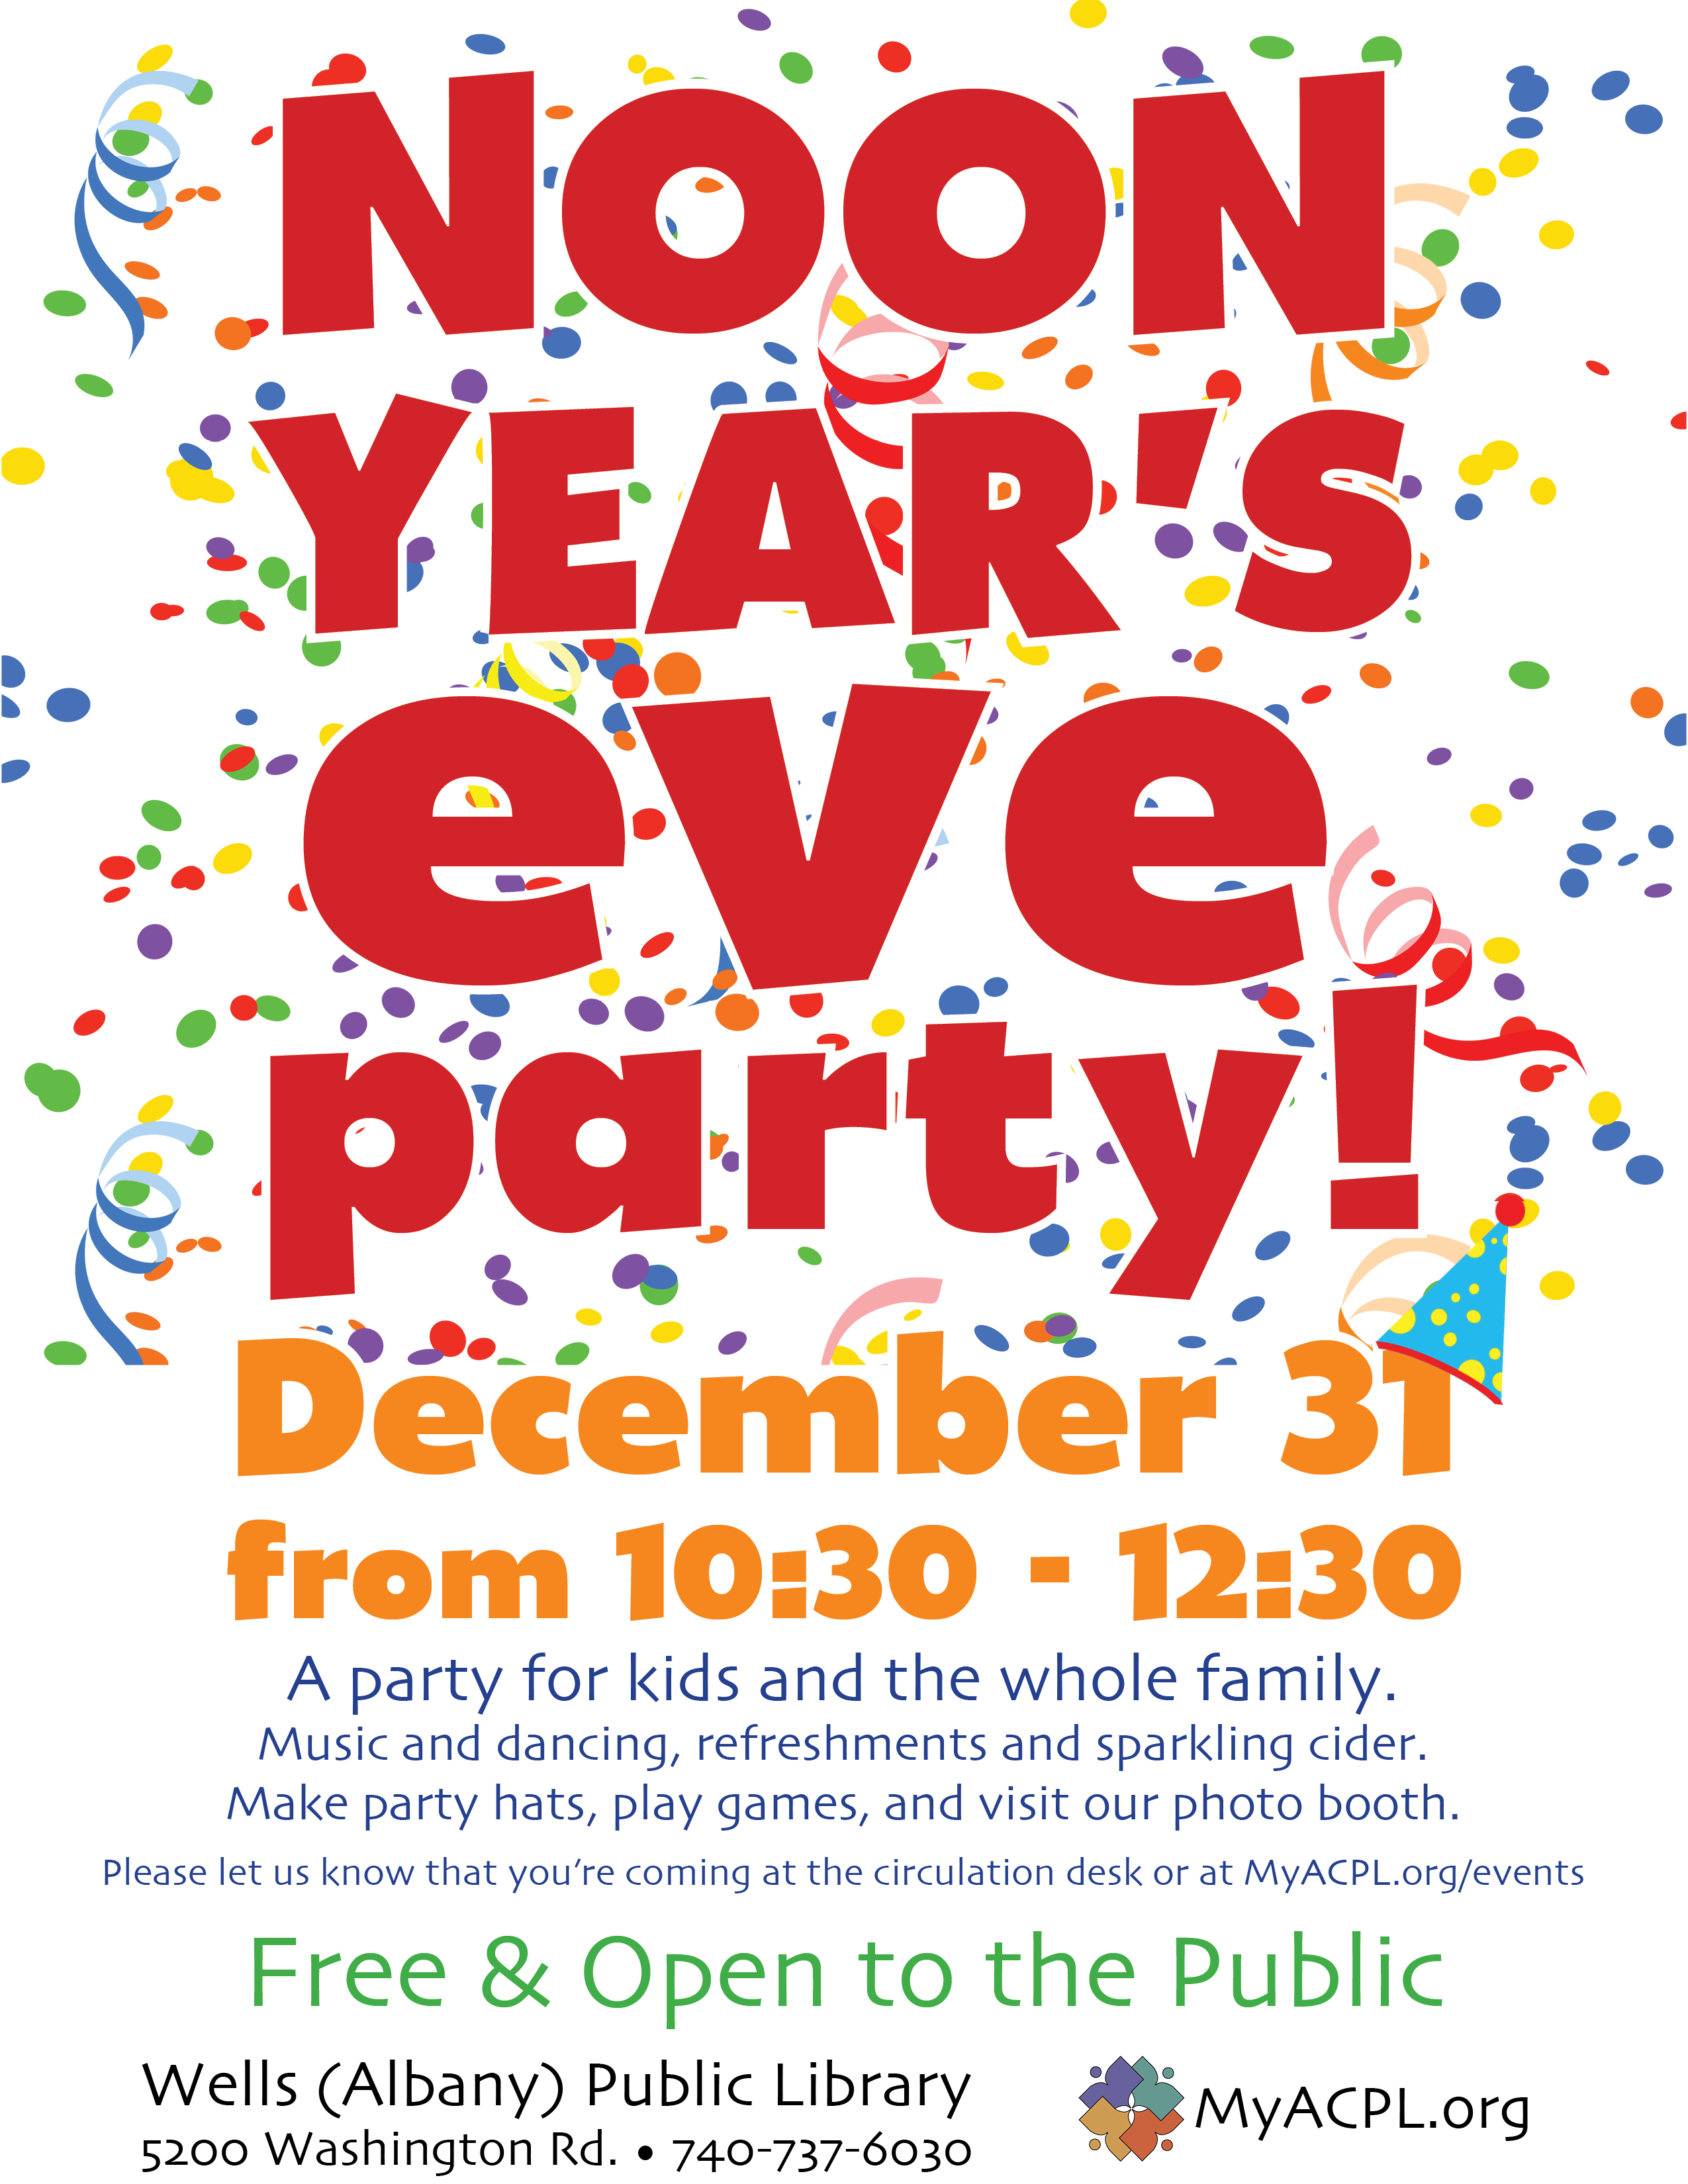 Noon Year's Eve flyer